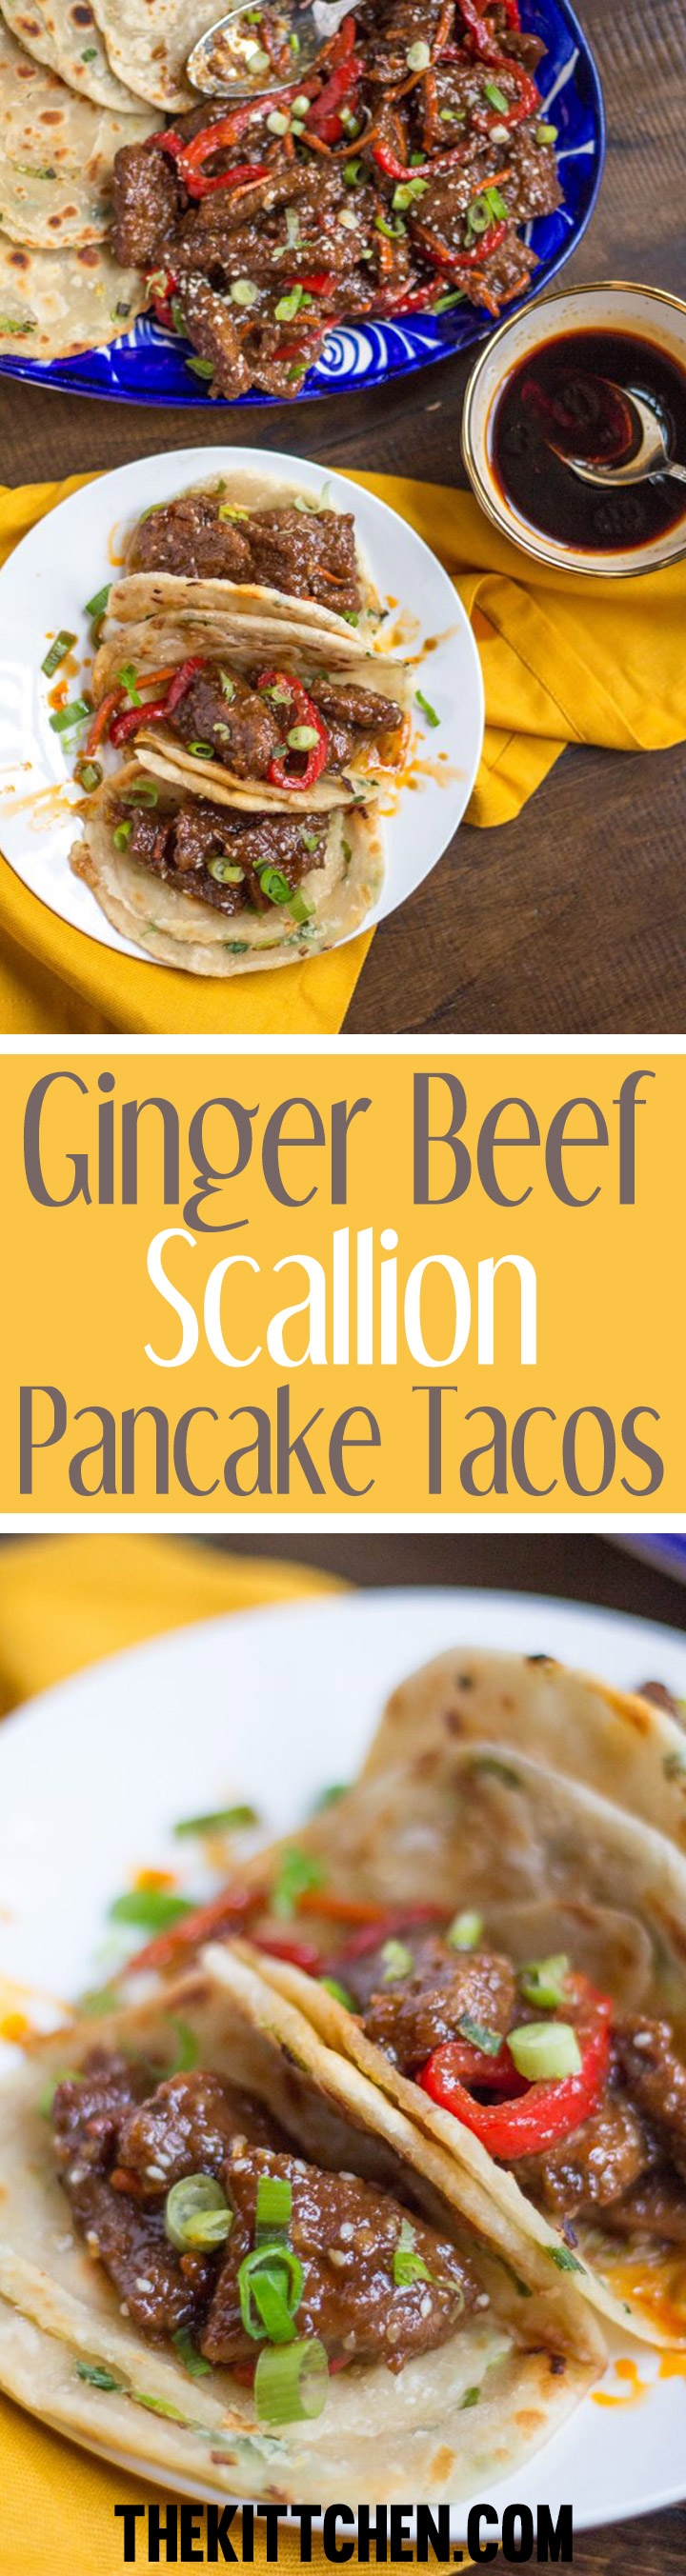 Ginger Beef Scallion Pancake Tacos - fun new recipe that combines Korean food with tacos!